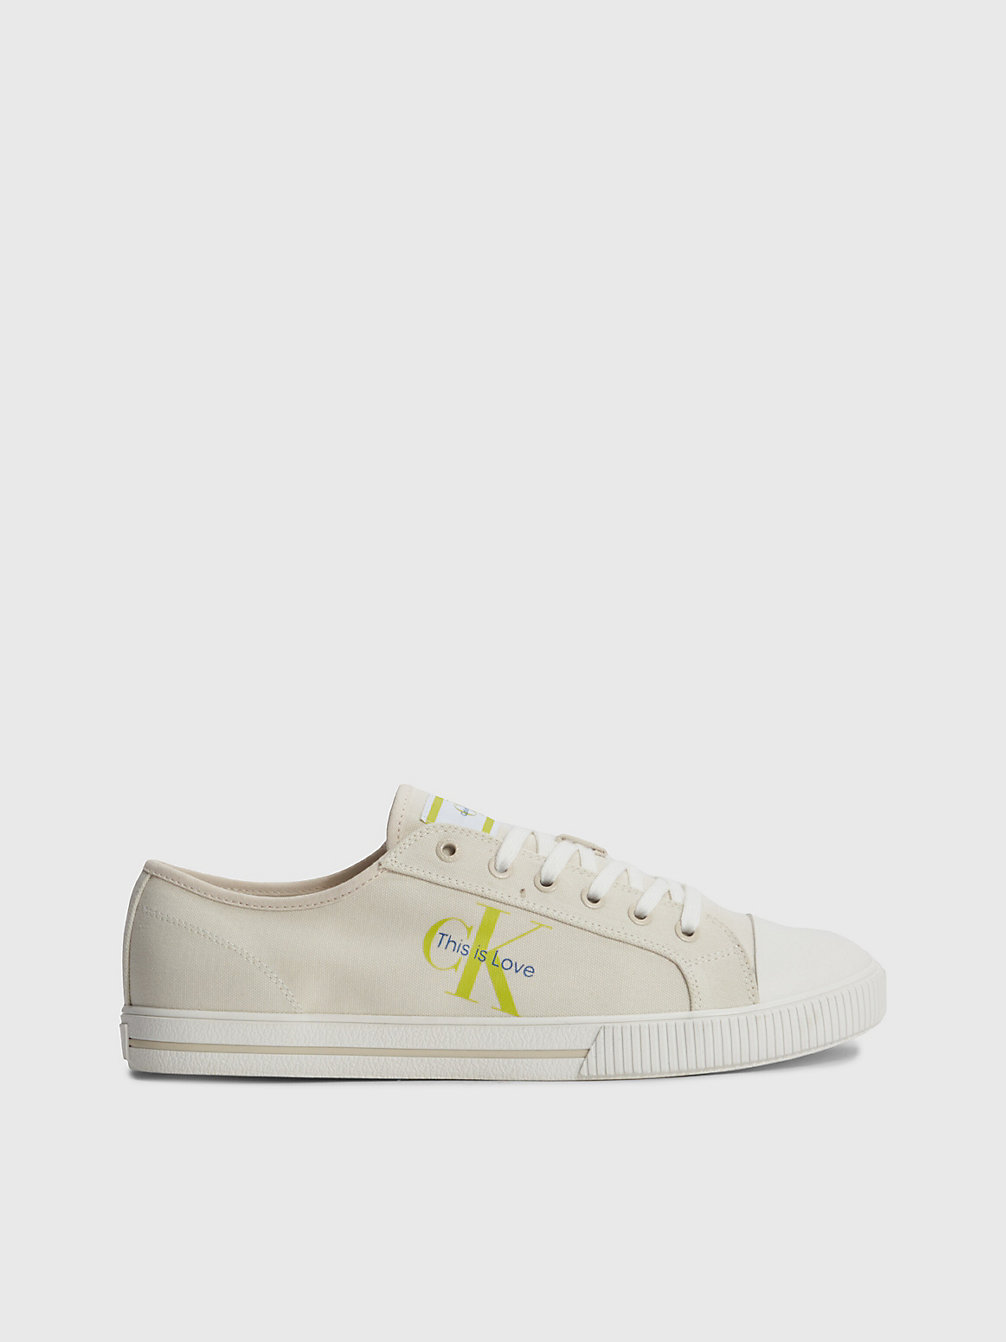 CREAMY WHITE Recycled Canvas Trainers - Pride undefined men Calvin Klein